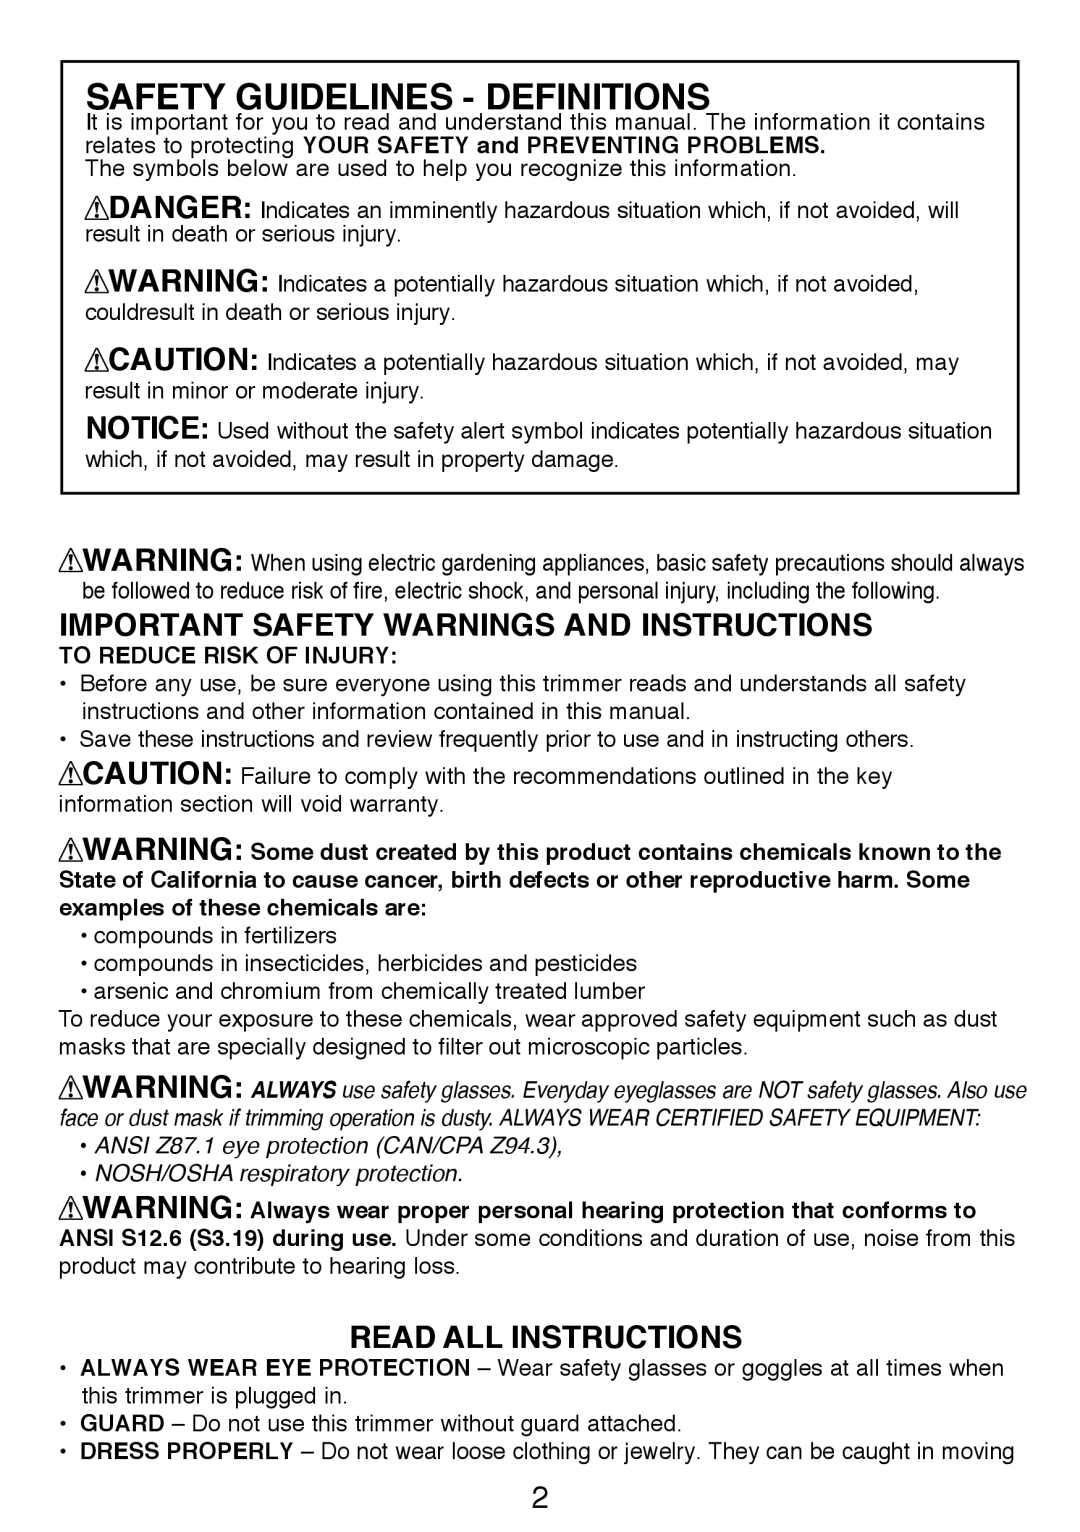 Black & Decker GH3000R Safety Guidelines - Definitions, Important Safety Warnings And Instructions, Read All Instructions 